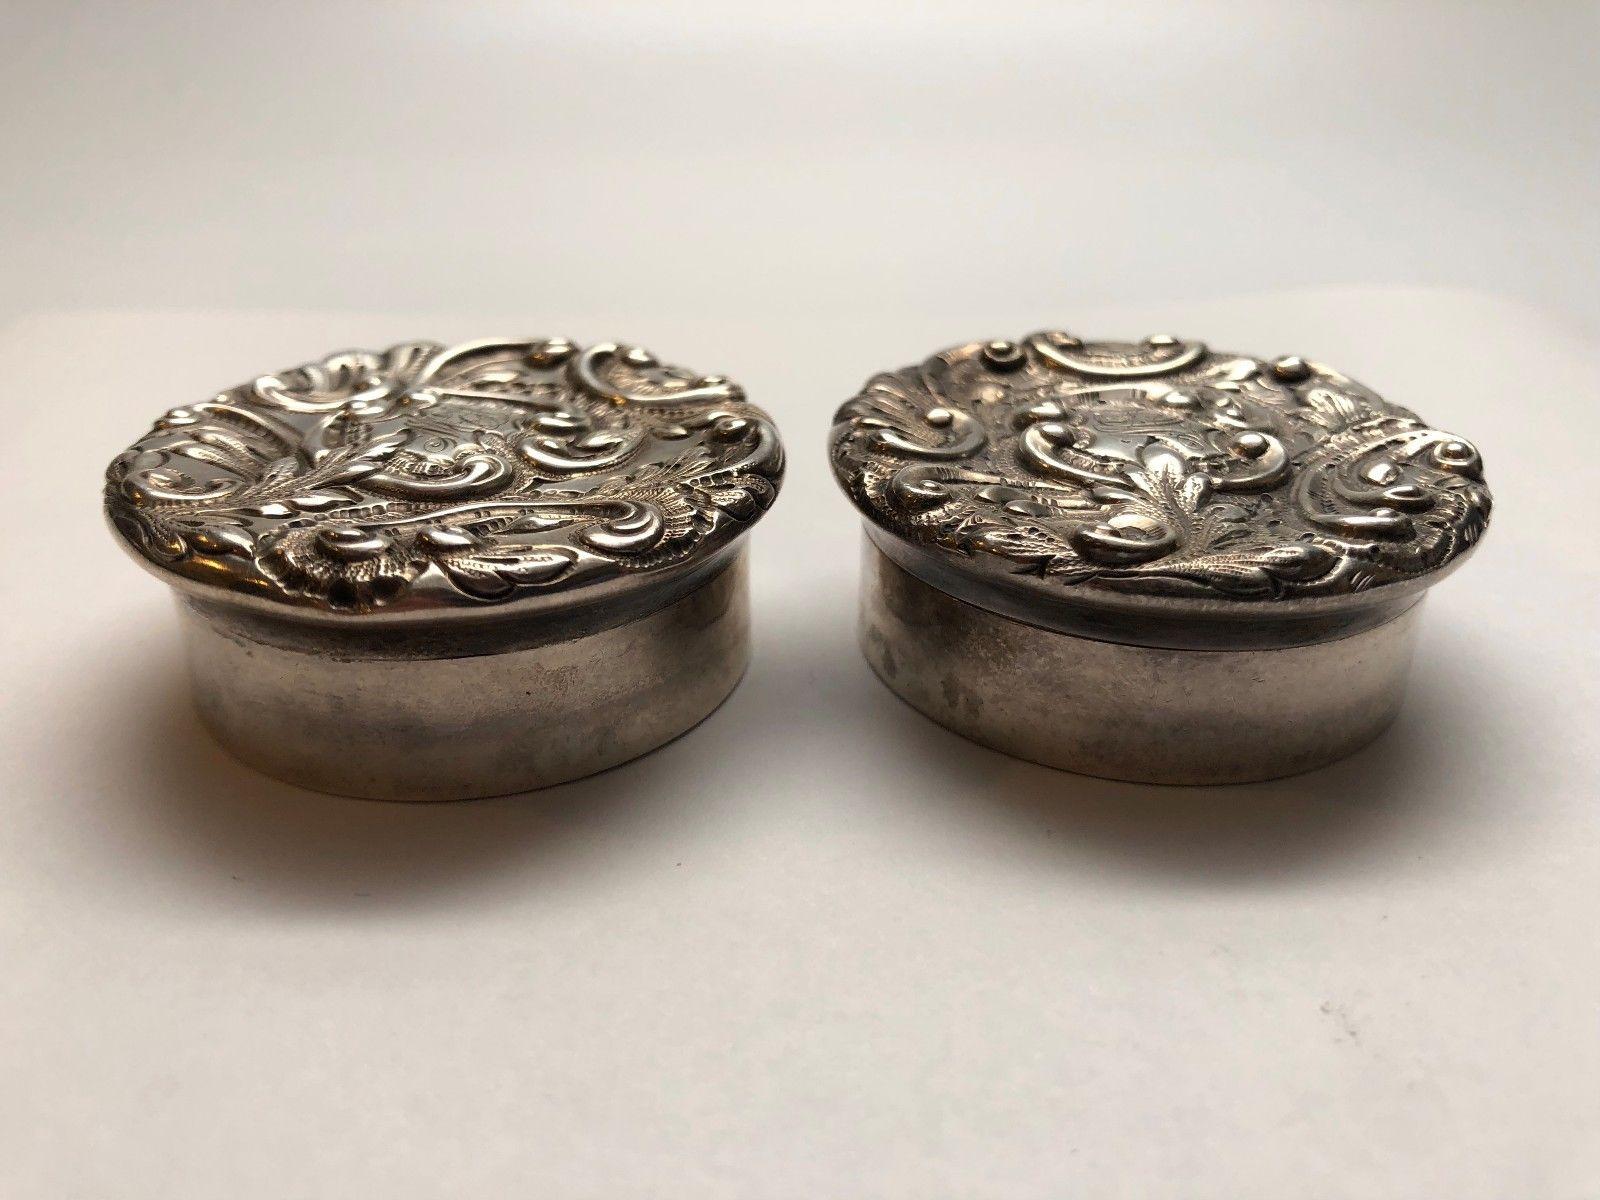 19th Century Set of 2 Theodore B Starr Sterling Silver Round Repoussé Pill Boxes Monogram MEH